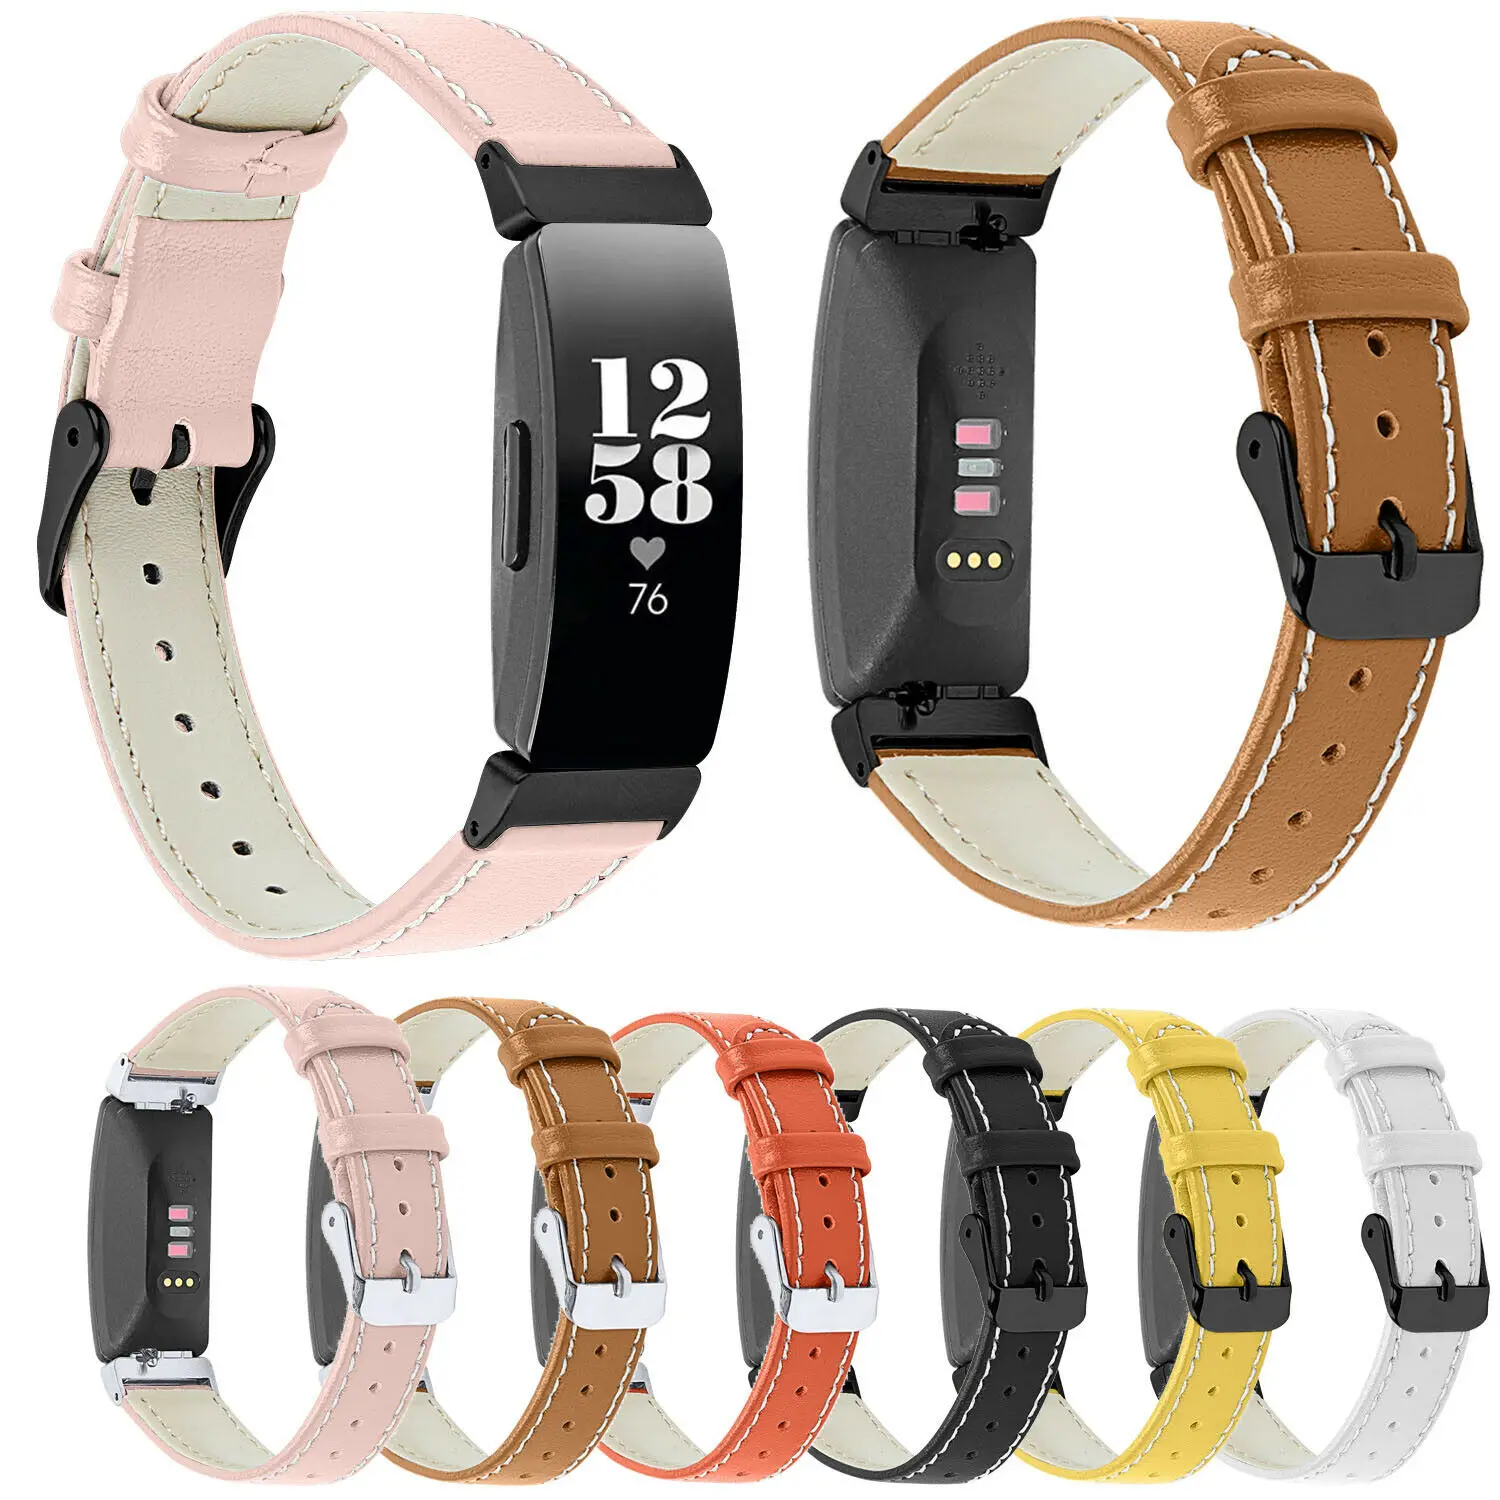 

Genuine Leather Wristband Bracelet For Fitbit Inspire / Inspire HR Activity Tracker Smartwatch Replacement Watch Band Strap